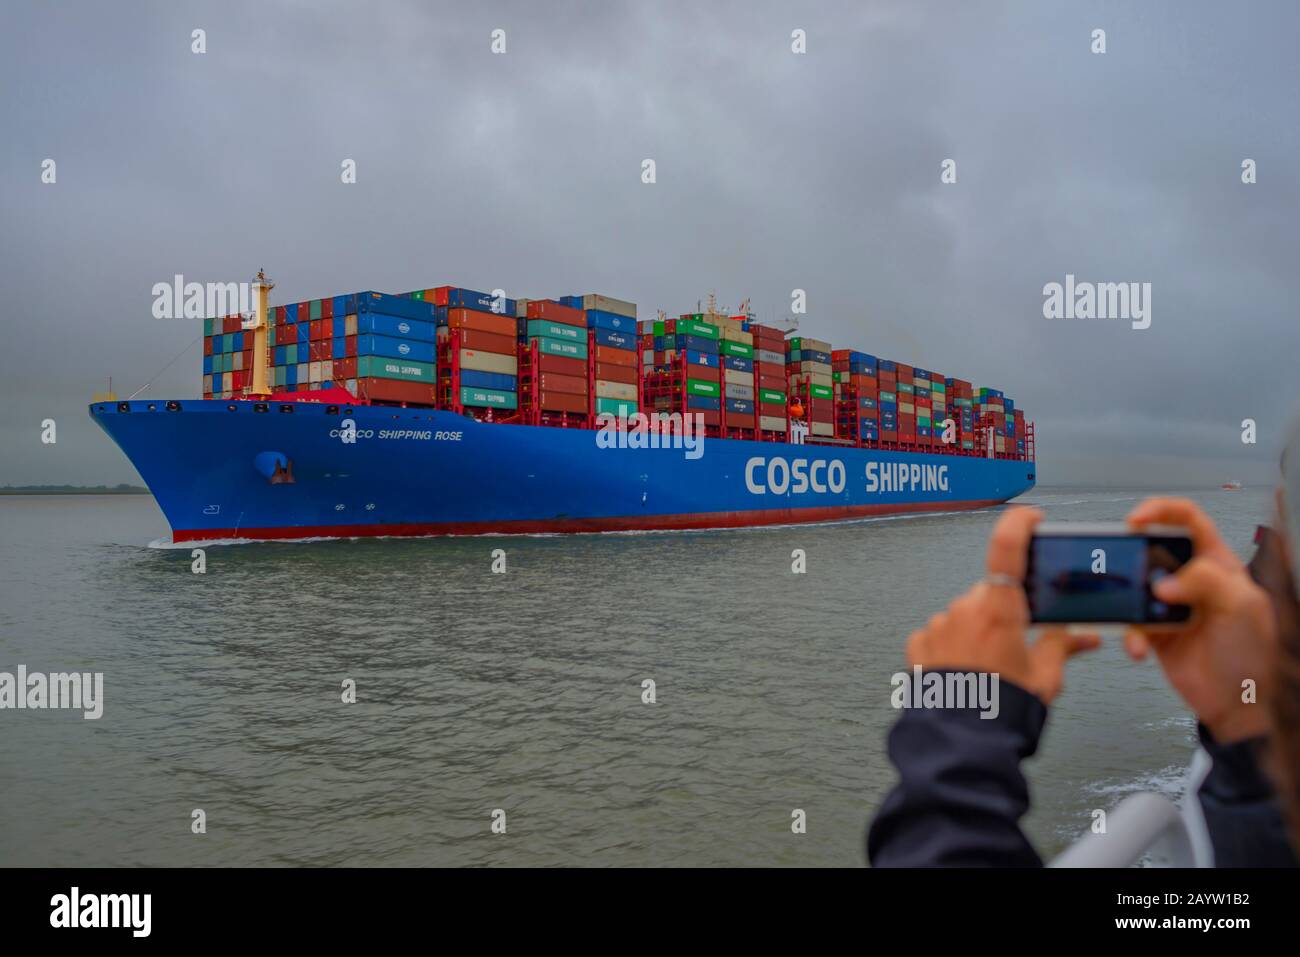 large container ship Cosco Shipping on the Elbe photographed with a smart phone, Germany, Schleswig-Holstein Stock Photo